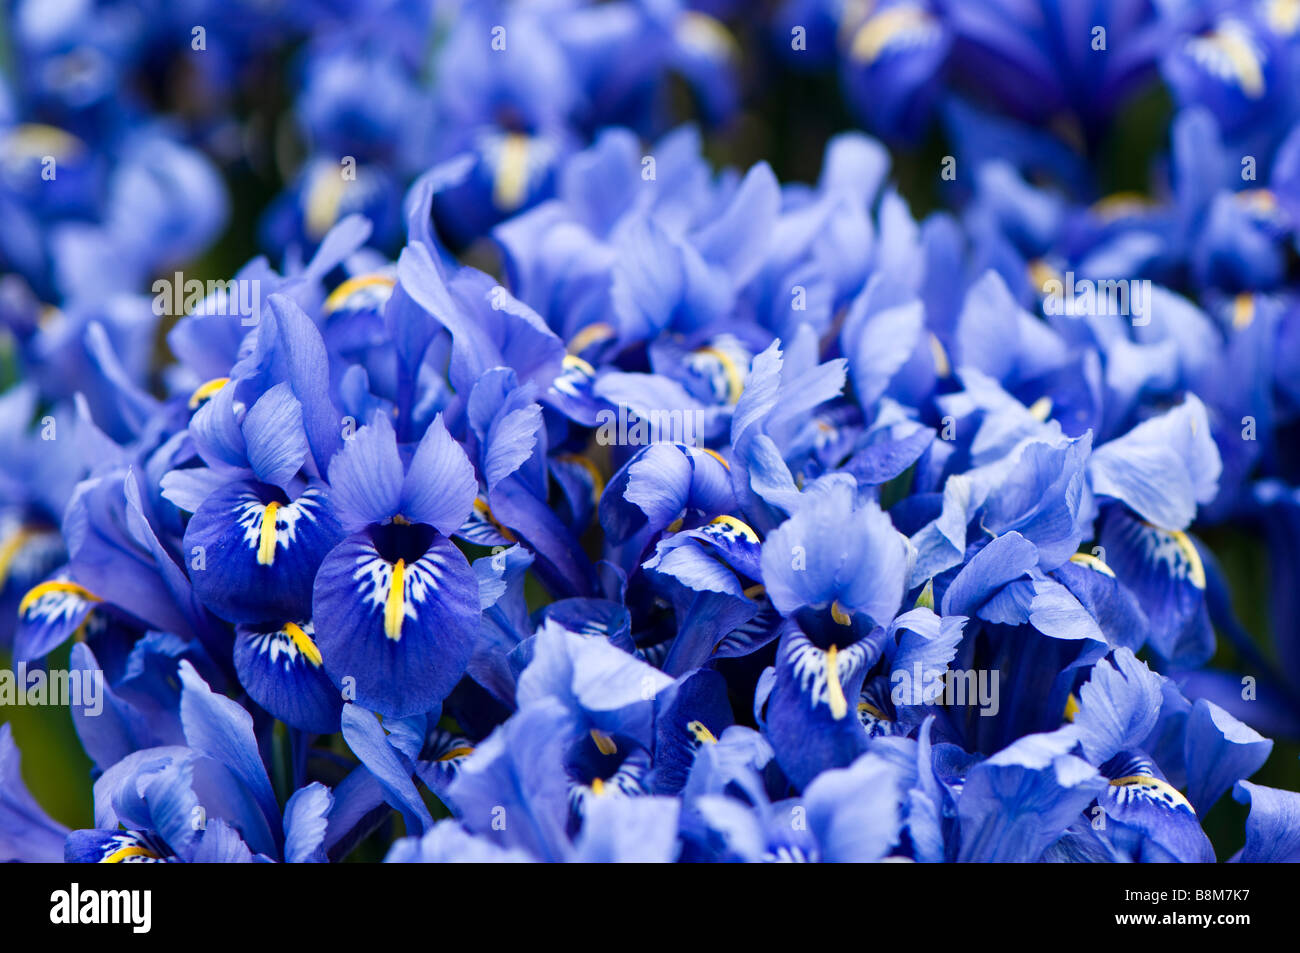 Close up of a group of blue iris reticulata Stock Photo